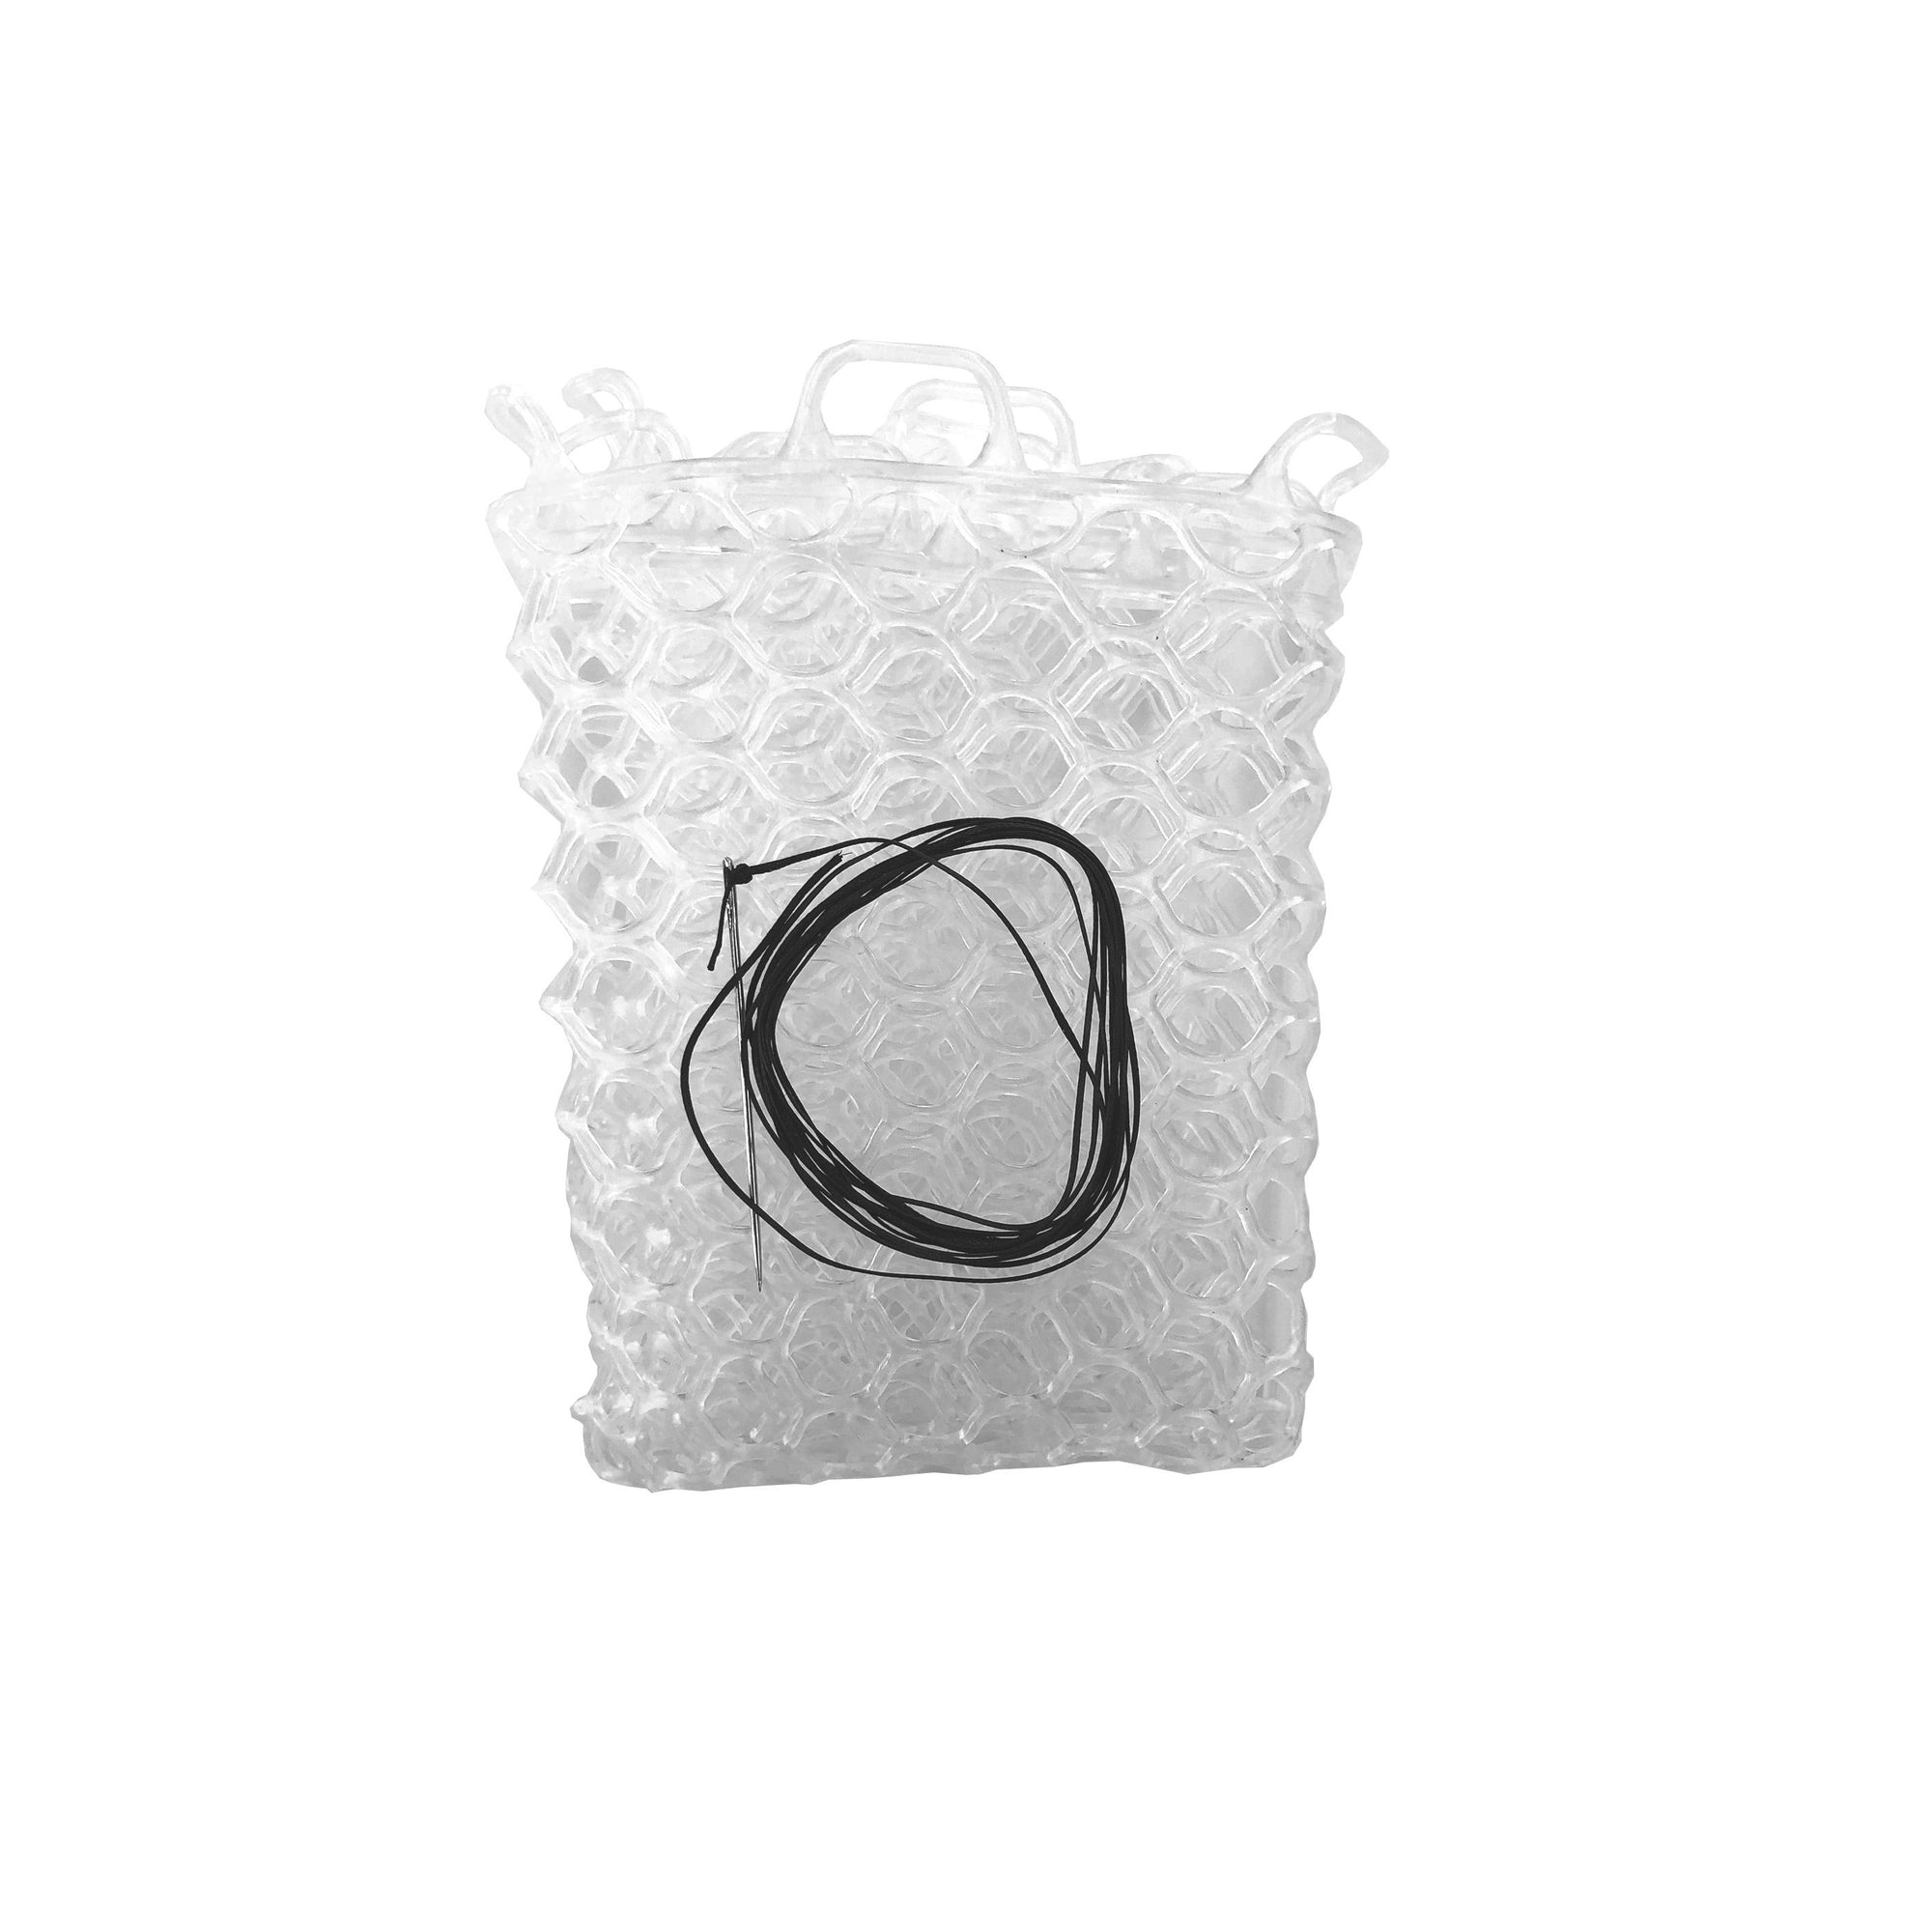 Fishpond Nomad Replacement Rubber Net 12.5"